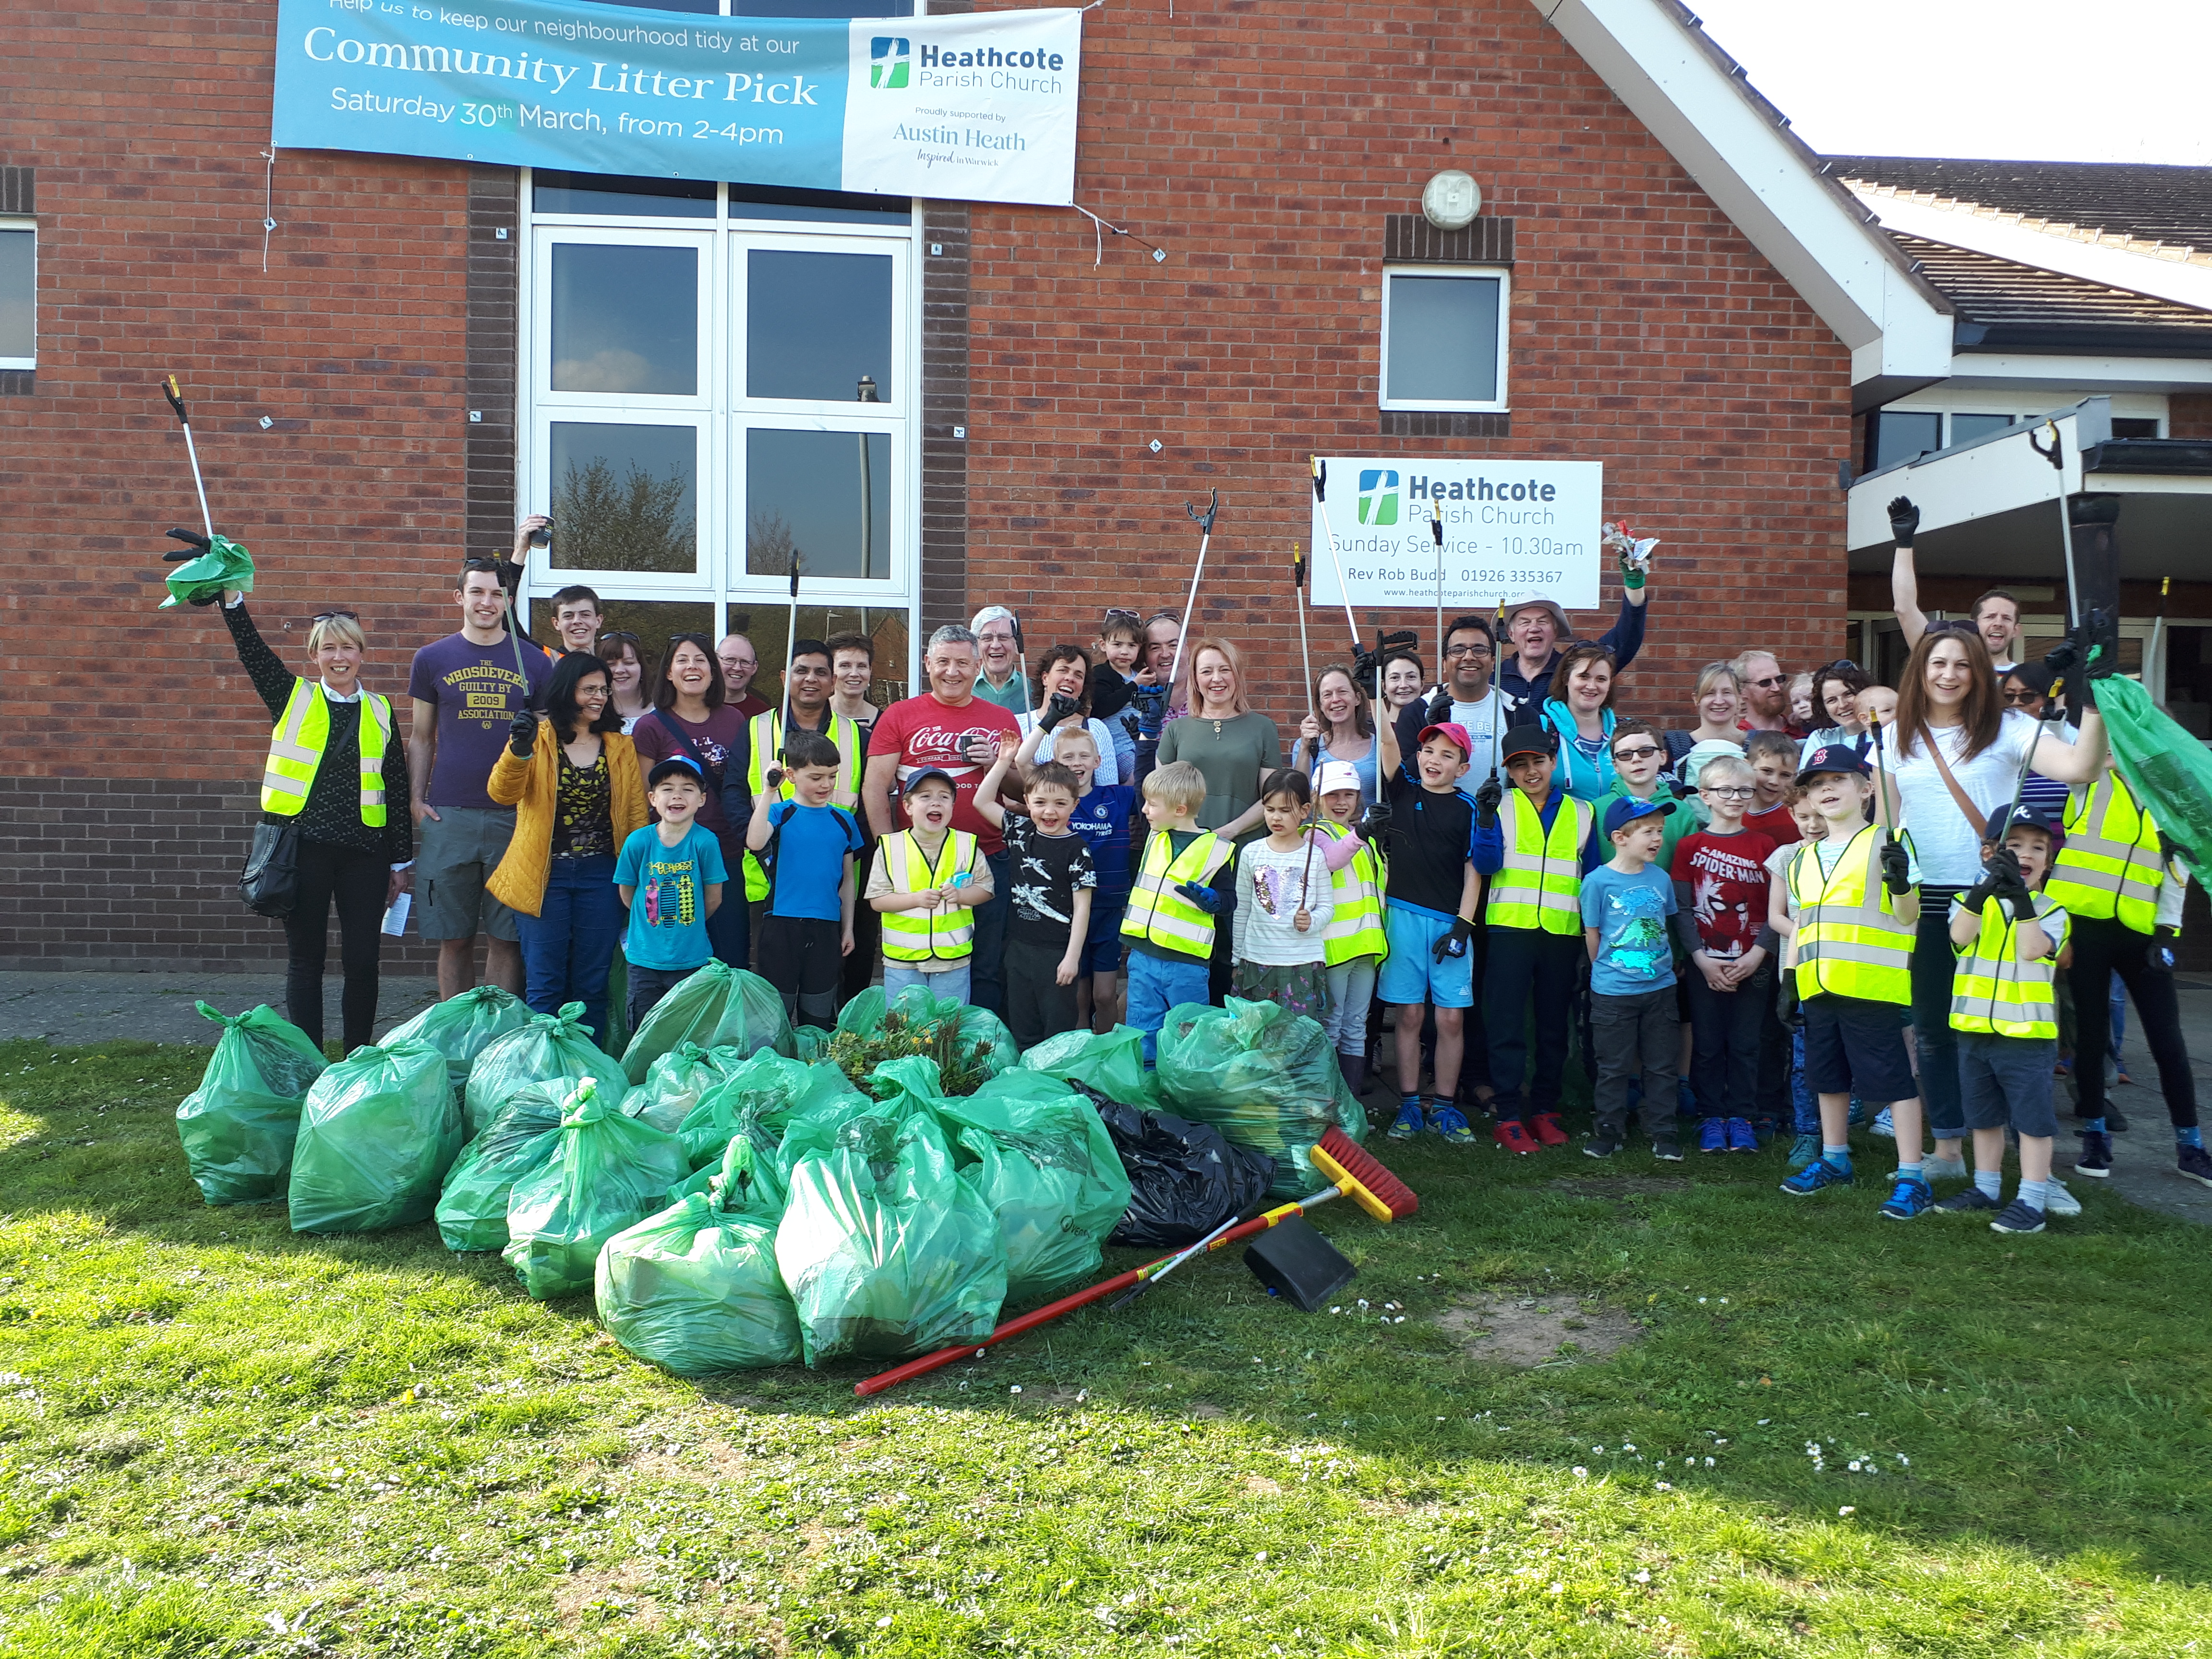 Warwickshire retirement village joins with local families in a ‘spring clean’ litter pick